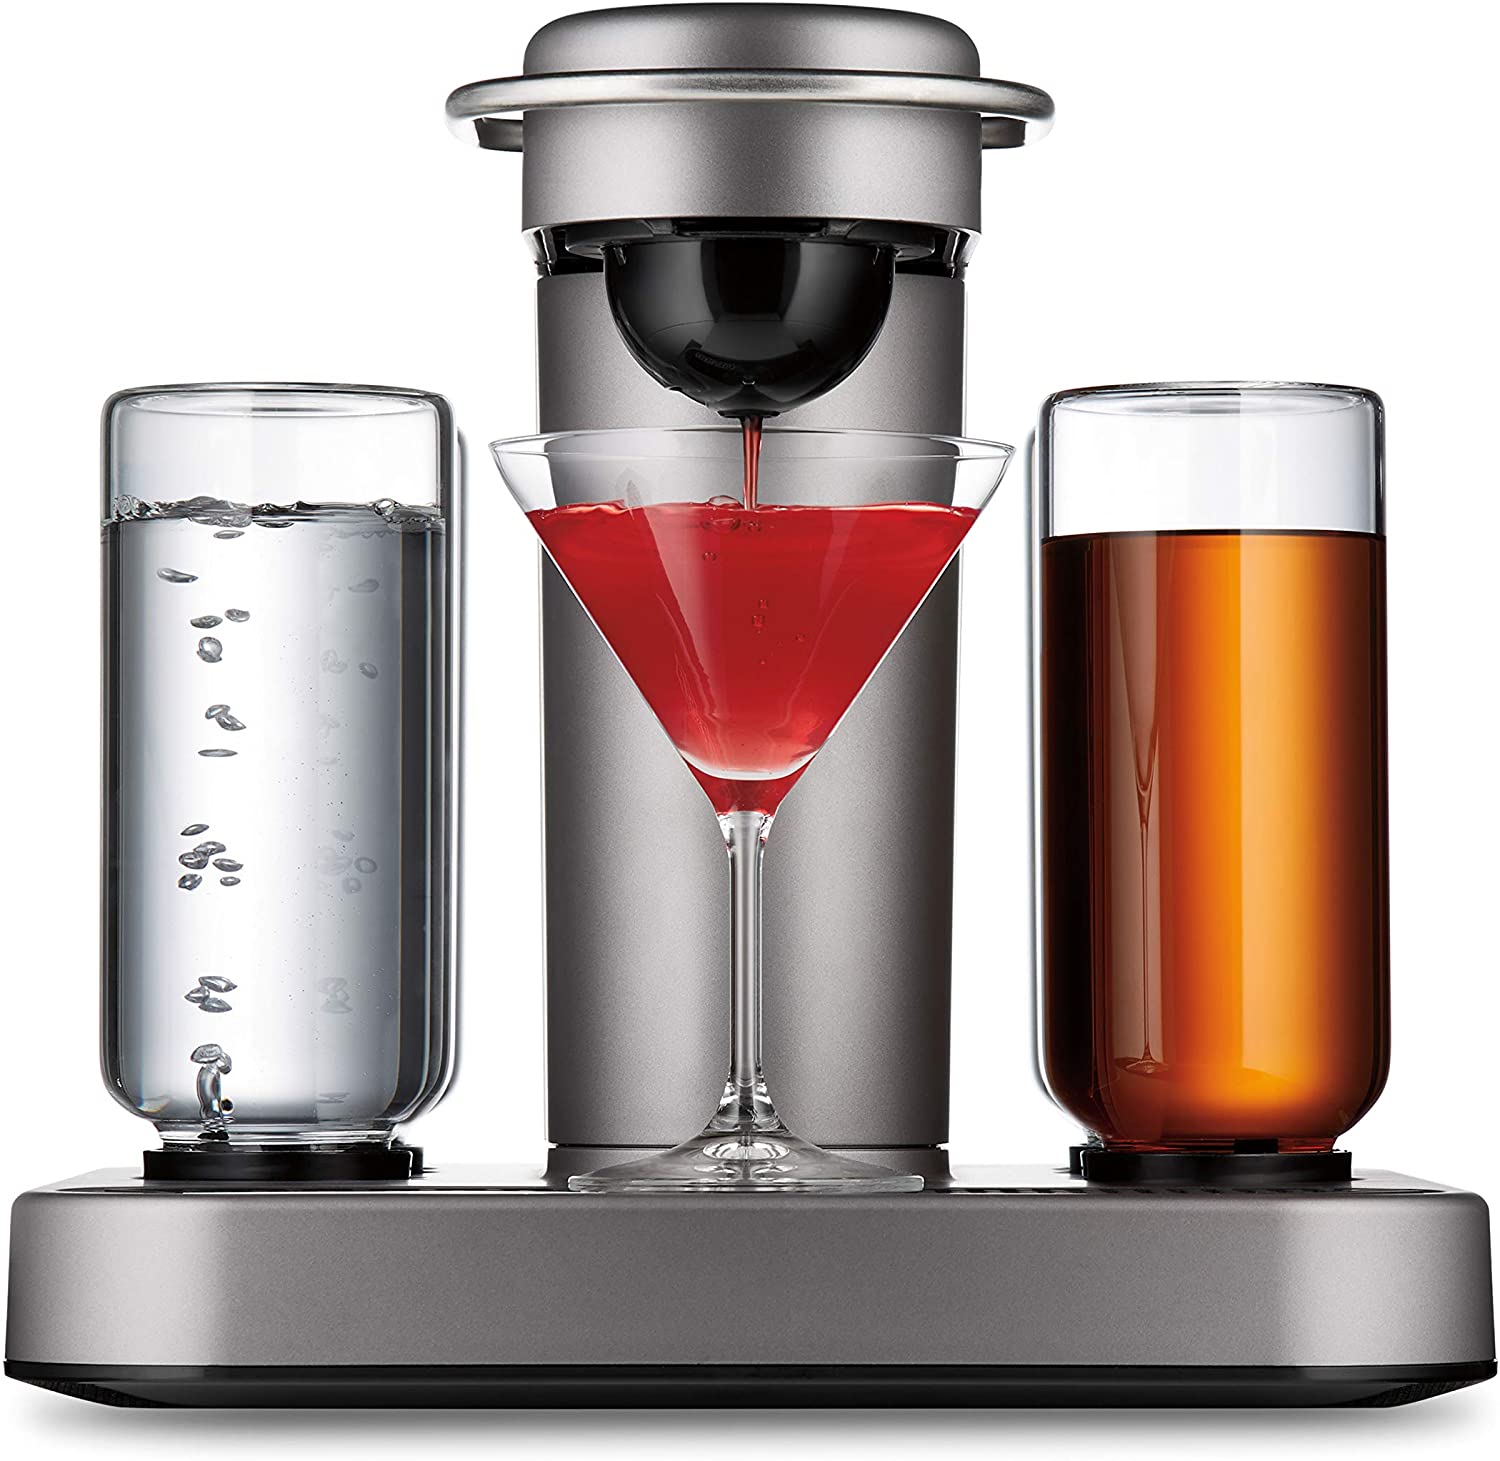 Review of Bartesian Premium Cocktail and Margarita Machine for the Home Bar (55300)